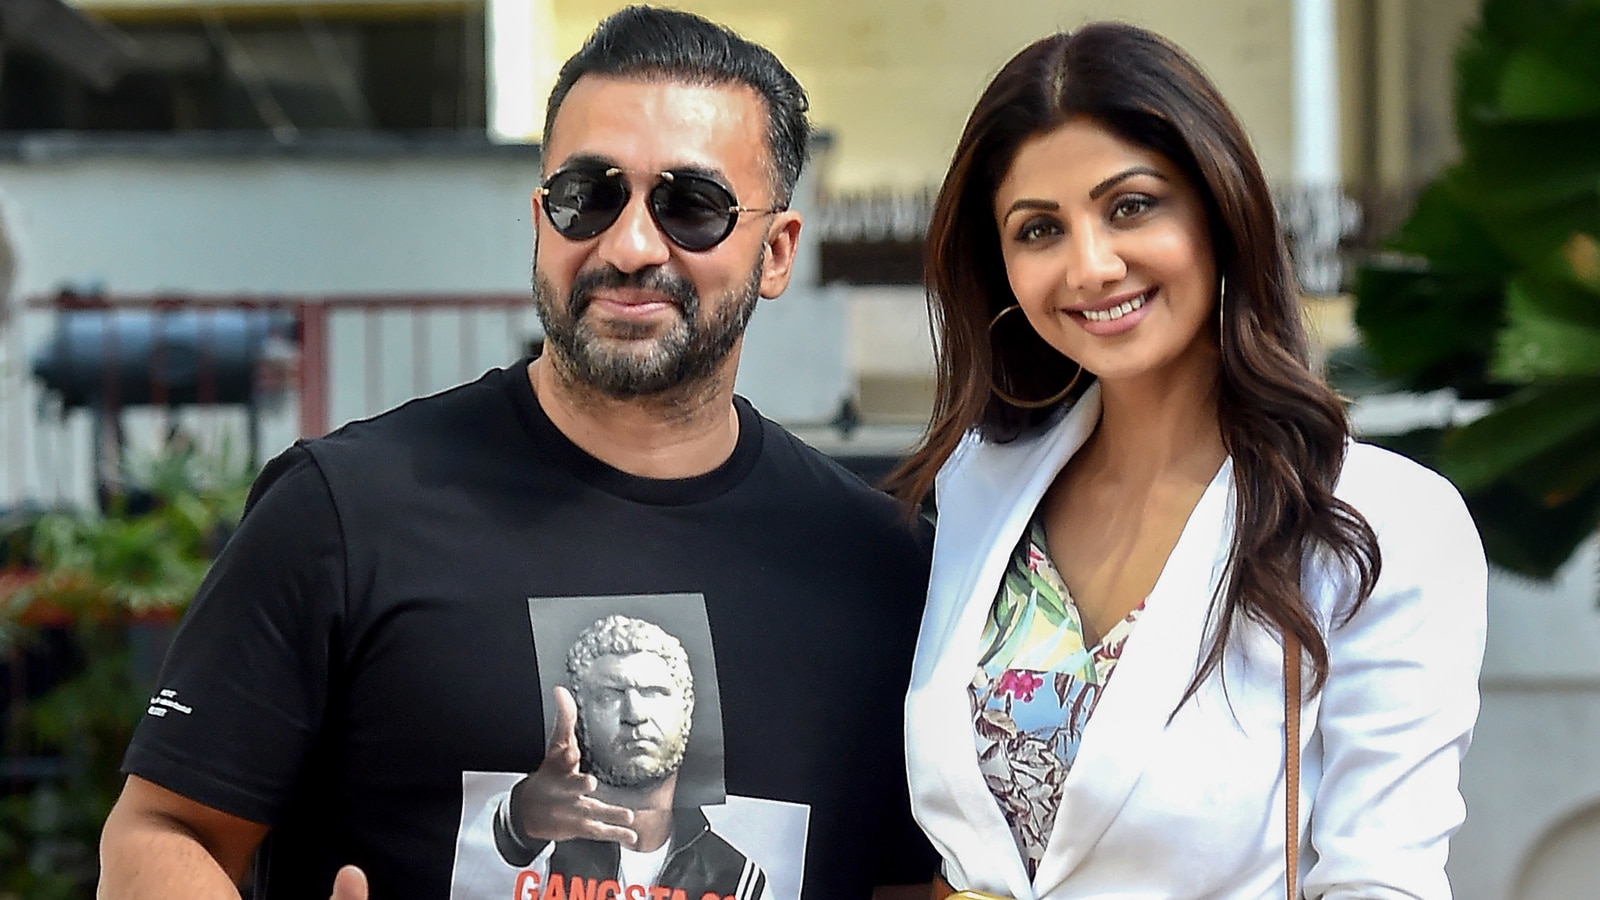 Sex Of Bhanu Sri - Actor Shilpa Shetty's husband Raj Kundra arrested for making porn: What we  know so far | Latest News India - Hindustan Times